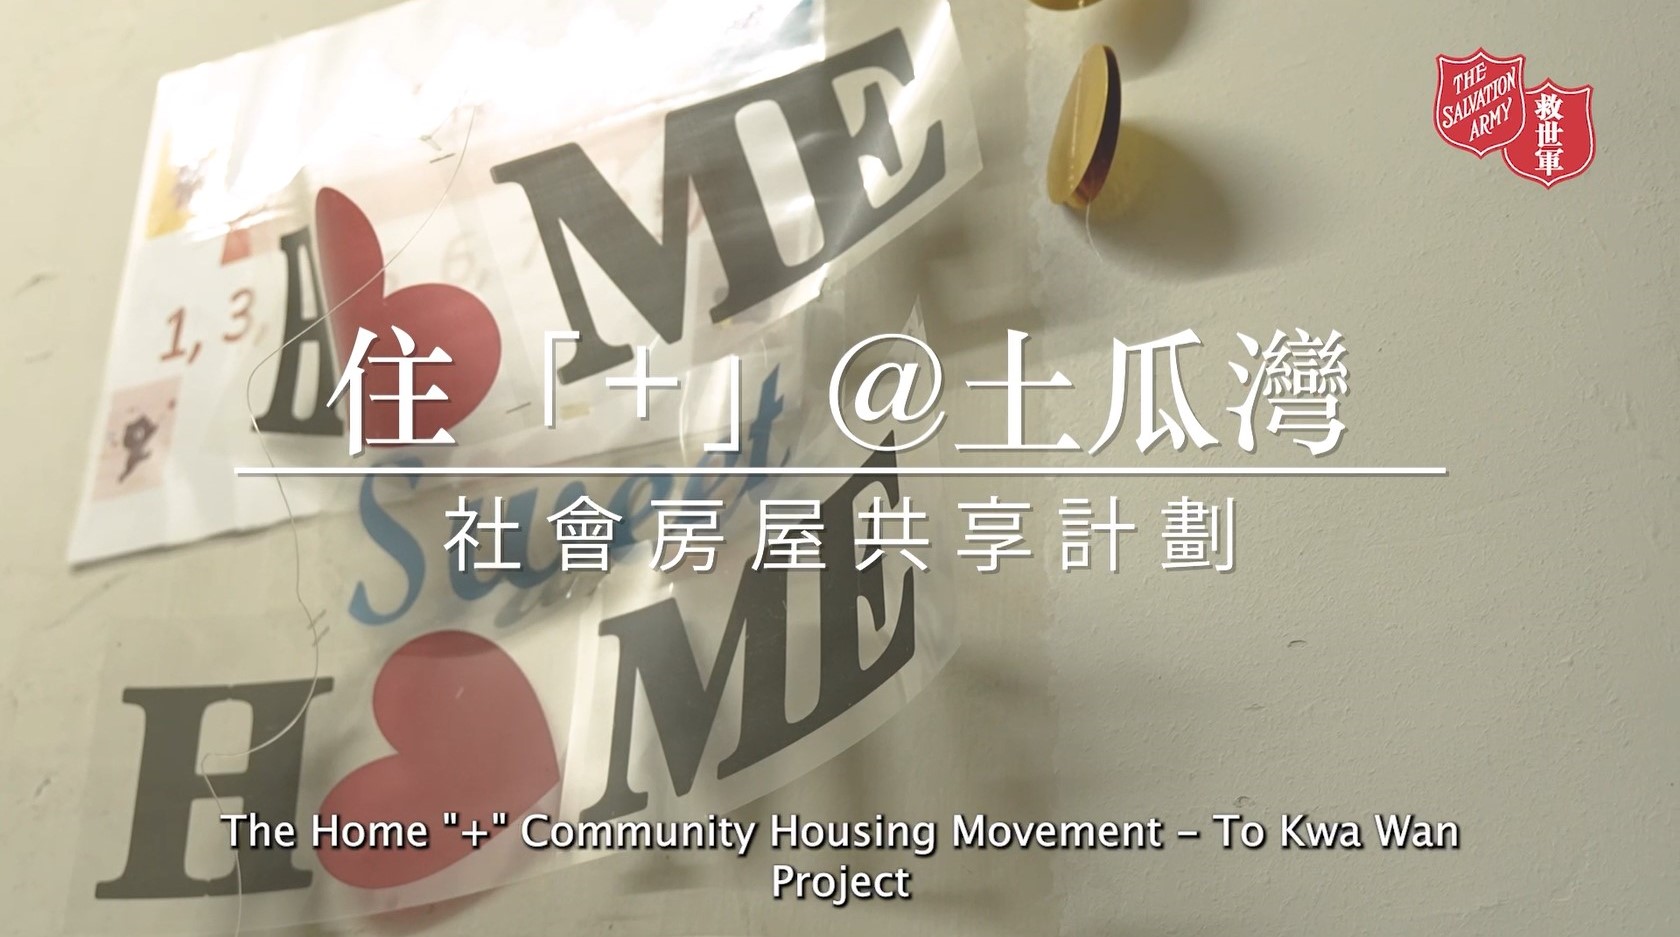 The Salvation Army Home "+" Community Housing Movement - To Kwa Wan Projec